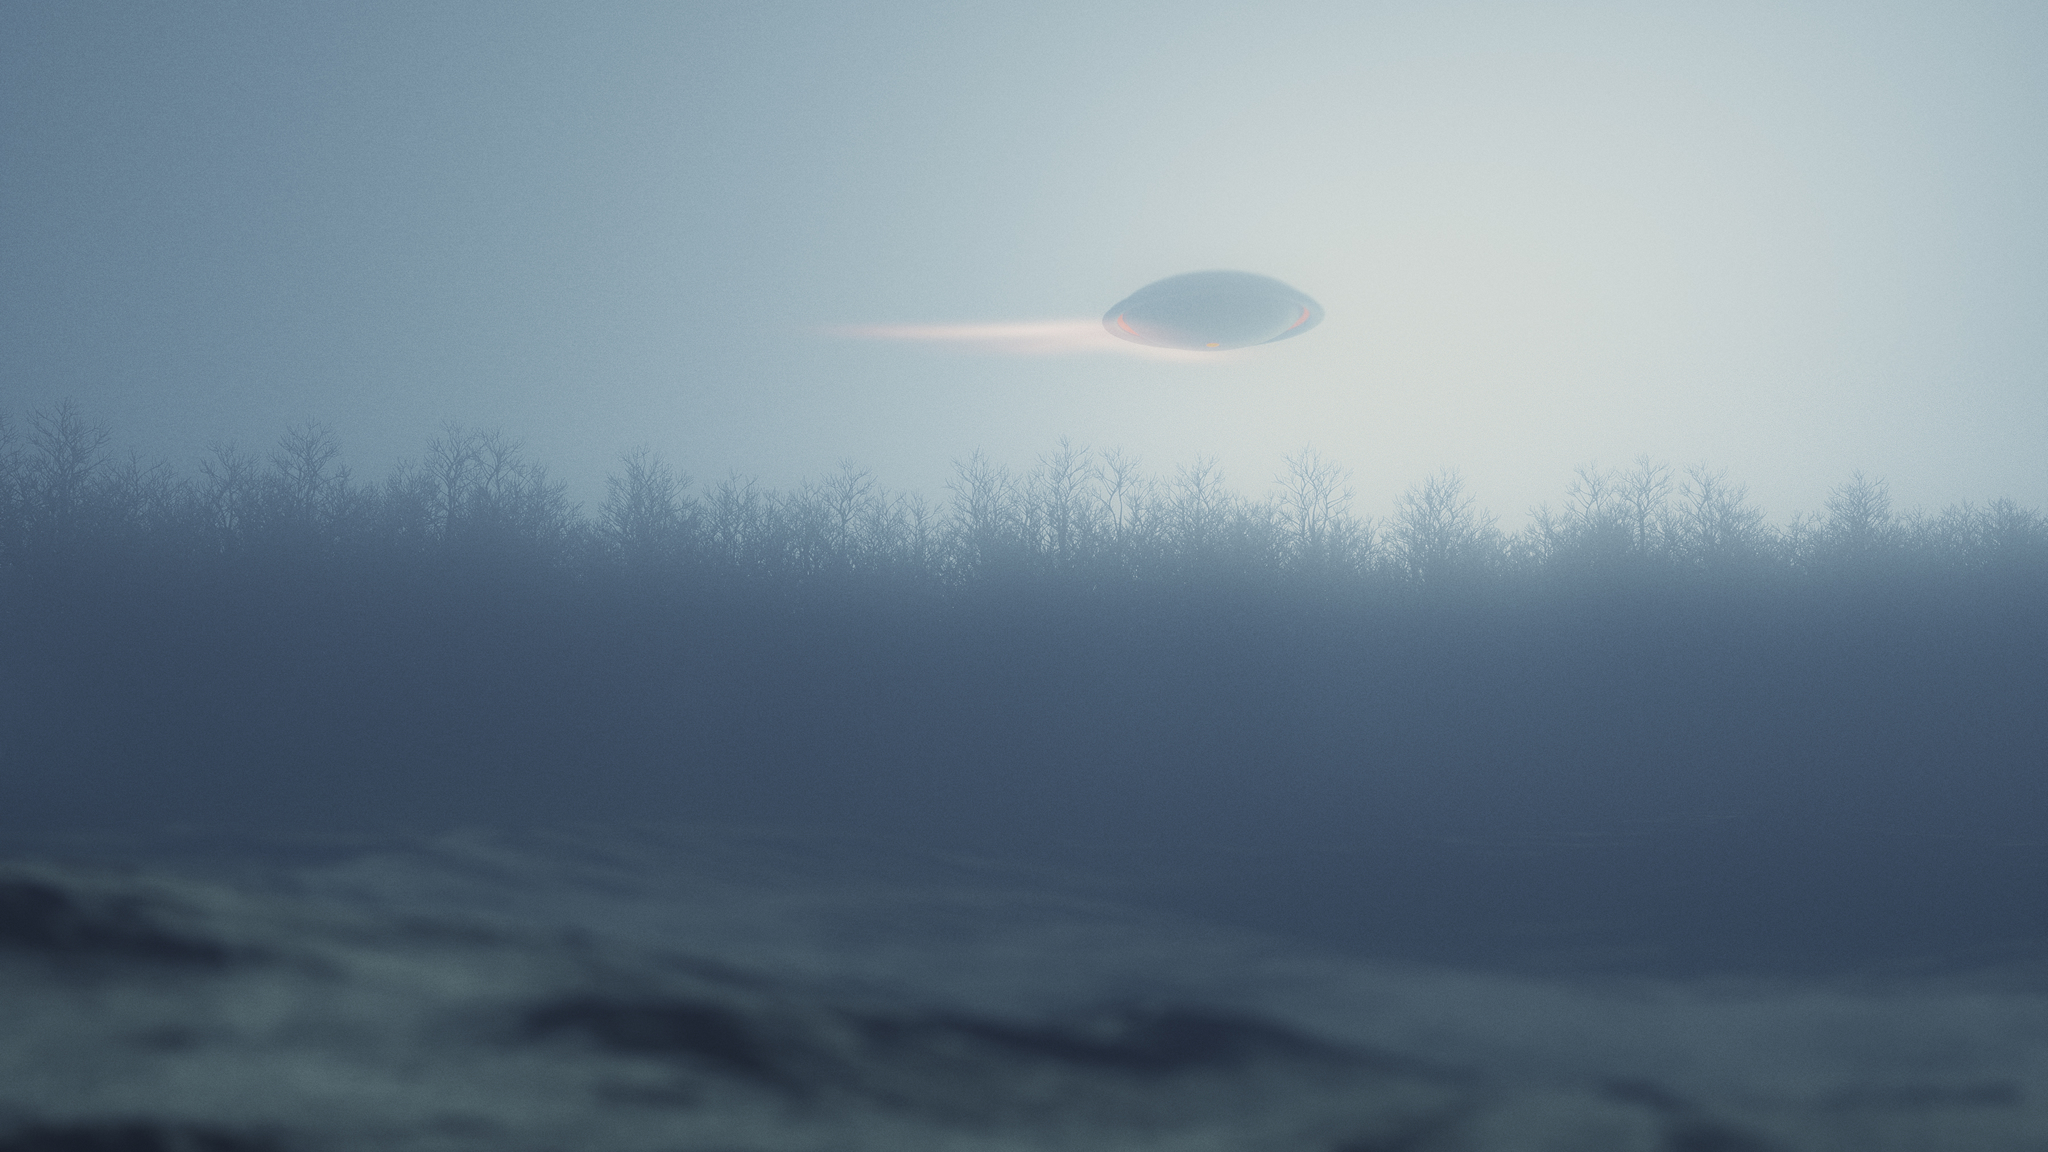 Read: More UFO Stories